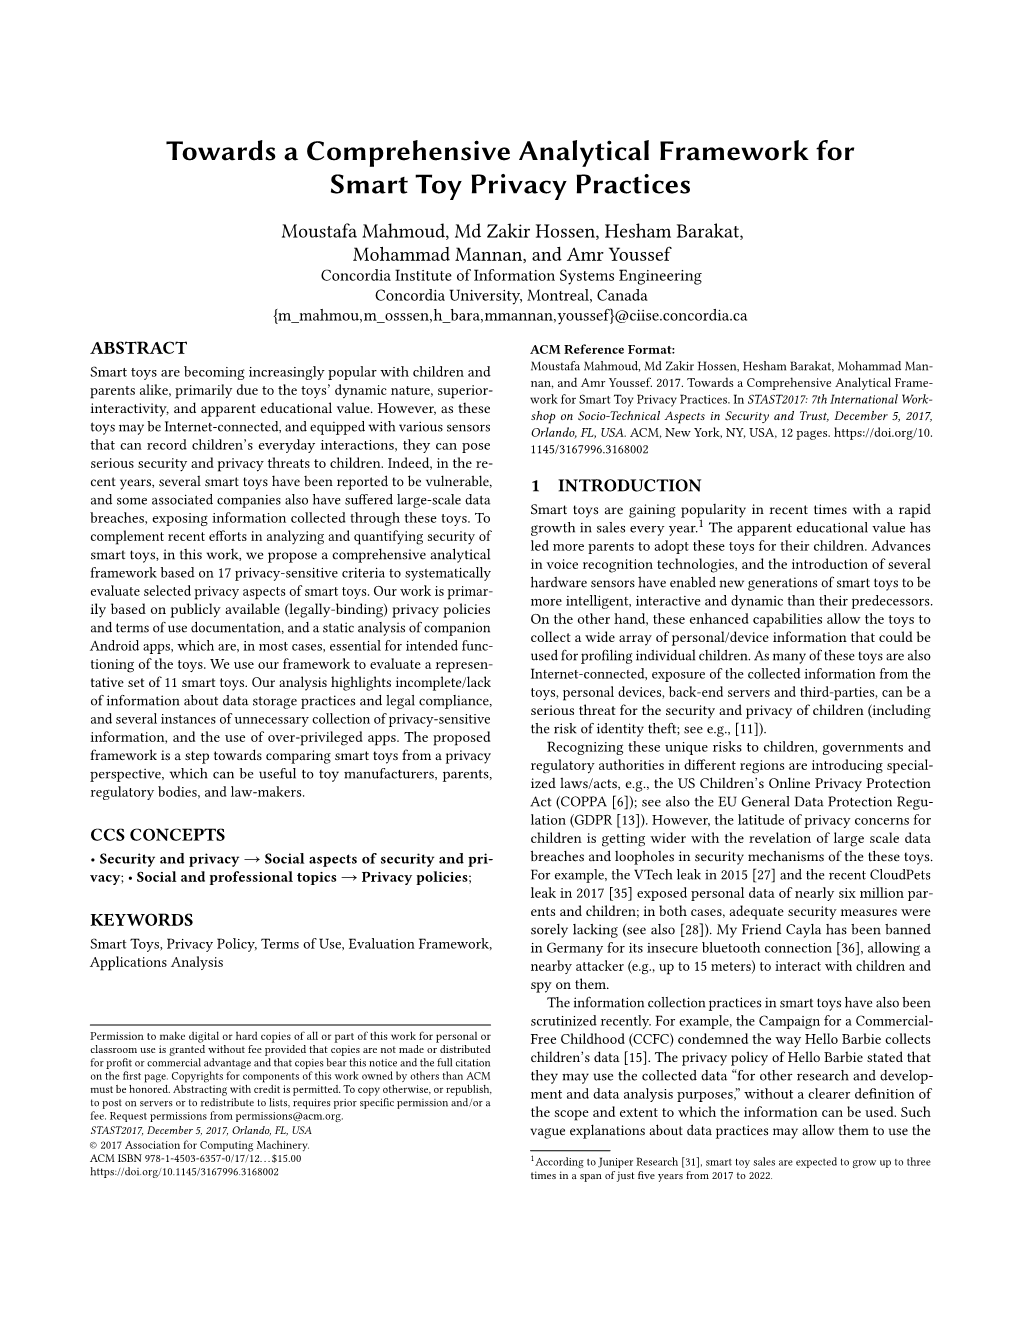 Towards a Comprehensive Analytical Framework for Smart Toy Privacy Practices